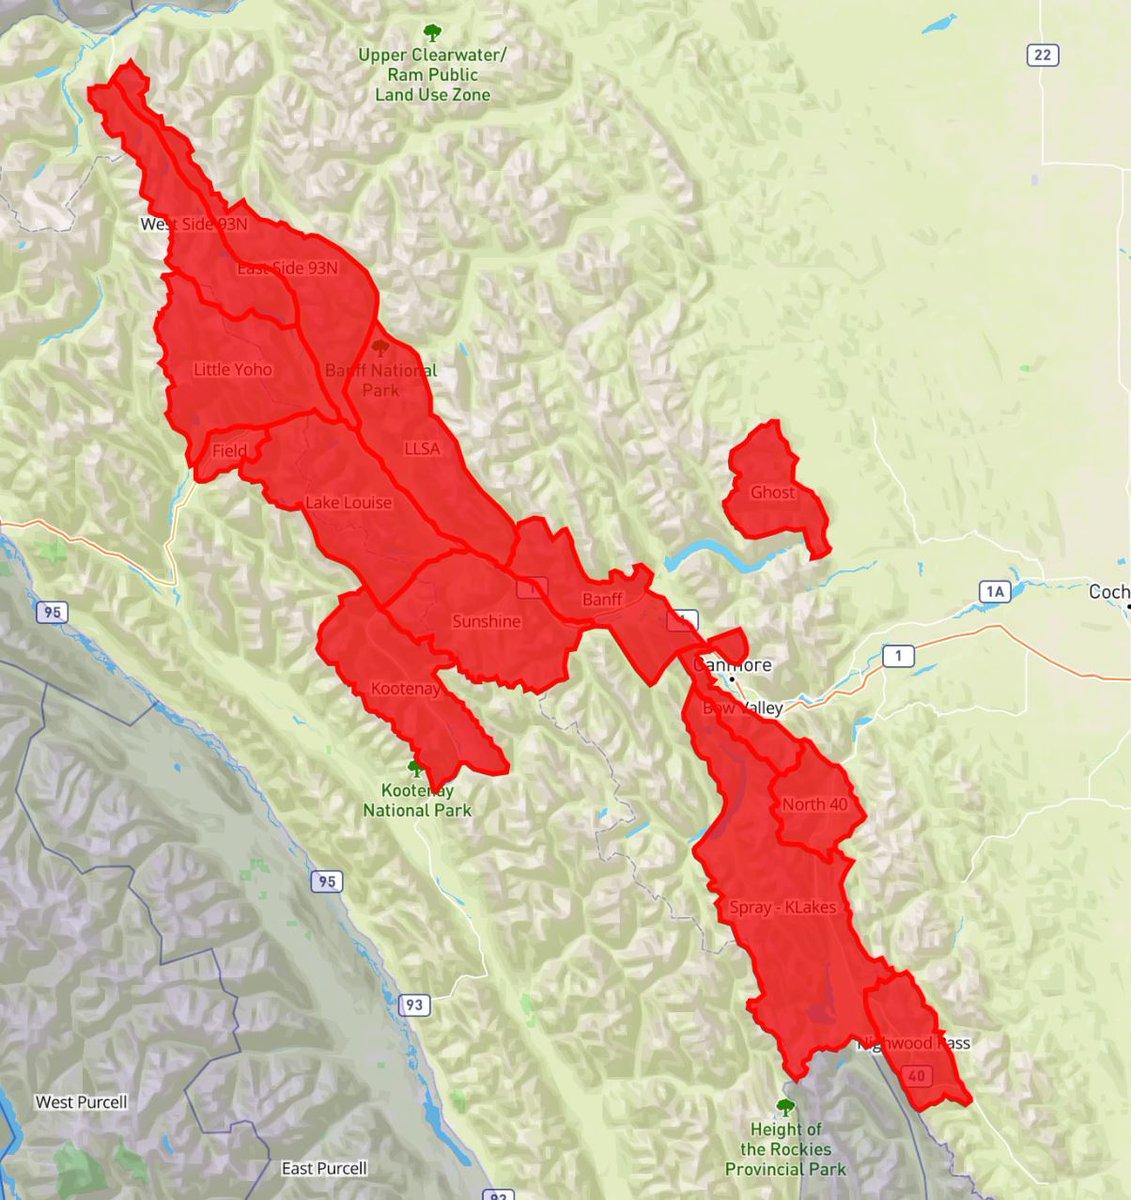 ❗️ Avalanche Canada, in partnership with Parks Canada, is extending the Special Public Avalanche Warning (SPAW). ⚠️ The Special Public Avalanche Warning (SPAW) is in effect until the end of Sunday March 10. For more information, please visit: avalanche.ca/spaw